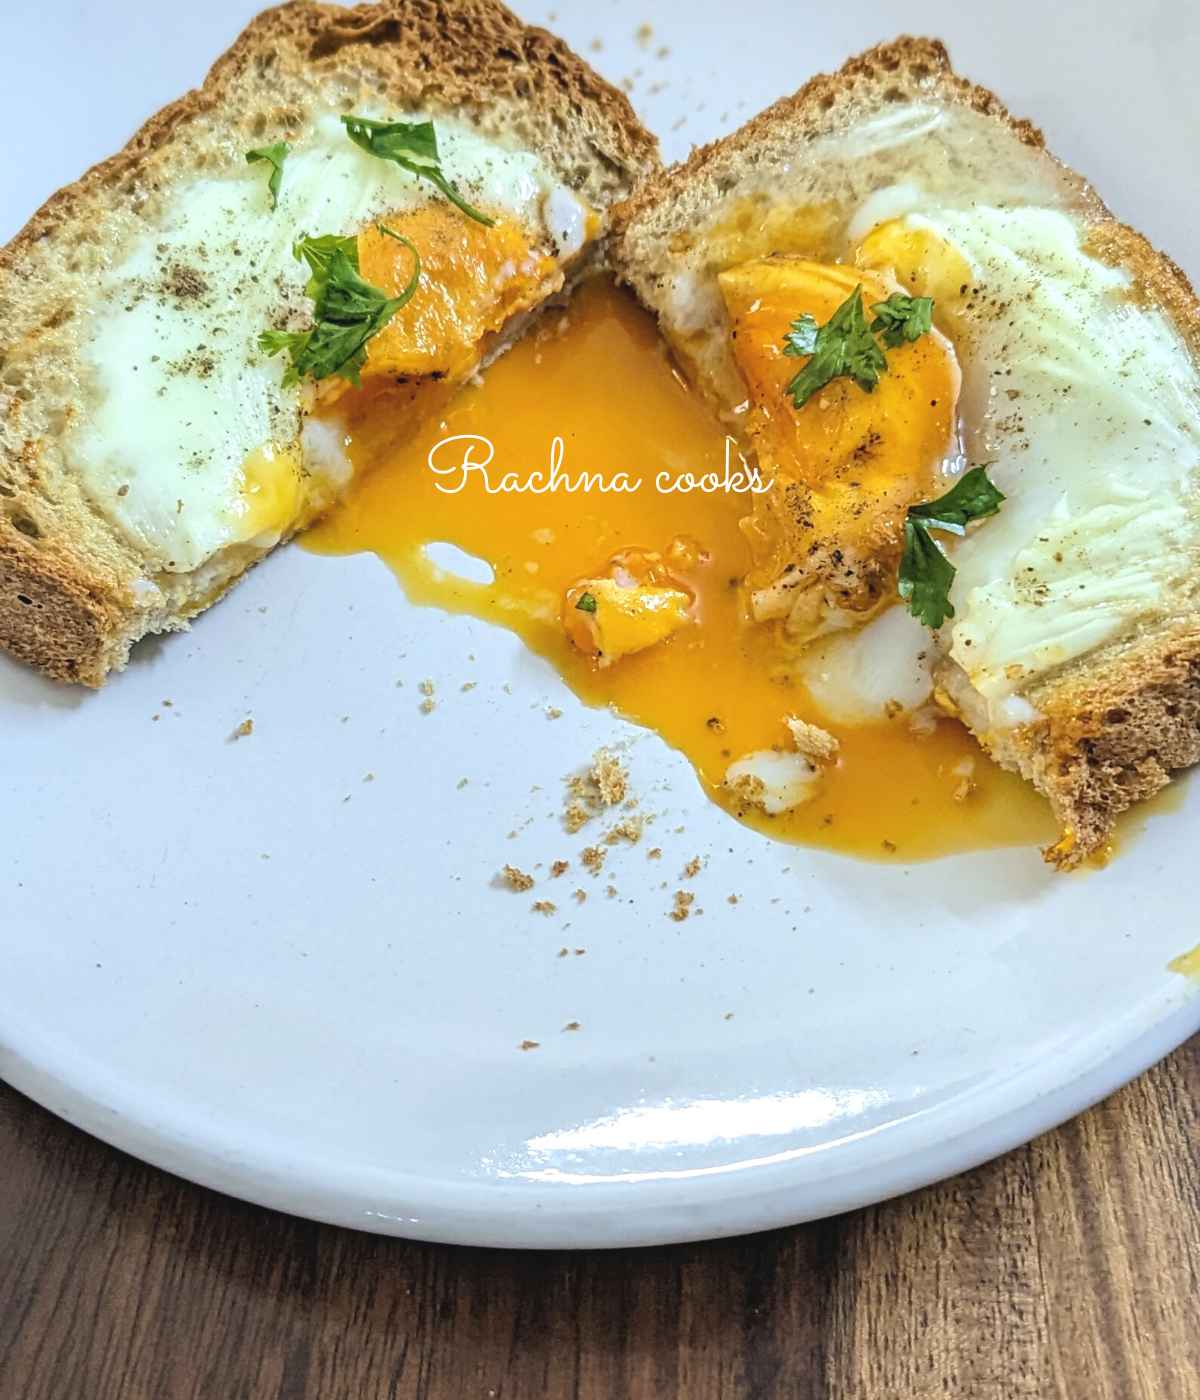 One egg toast cut into half with yolk spilling out.